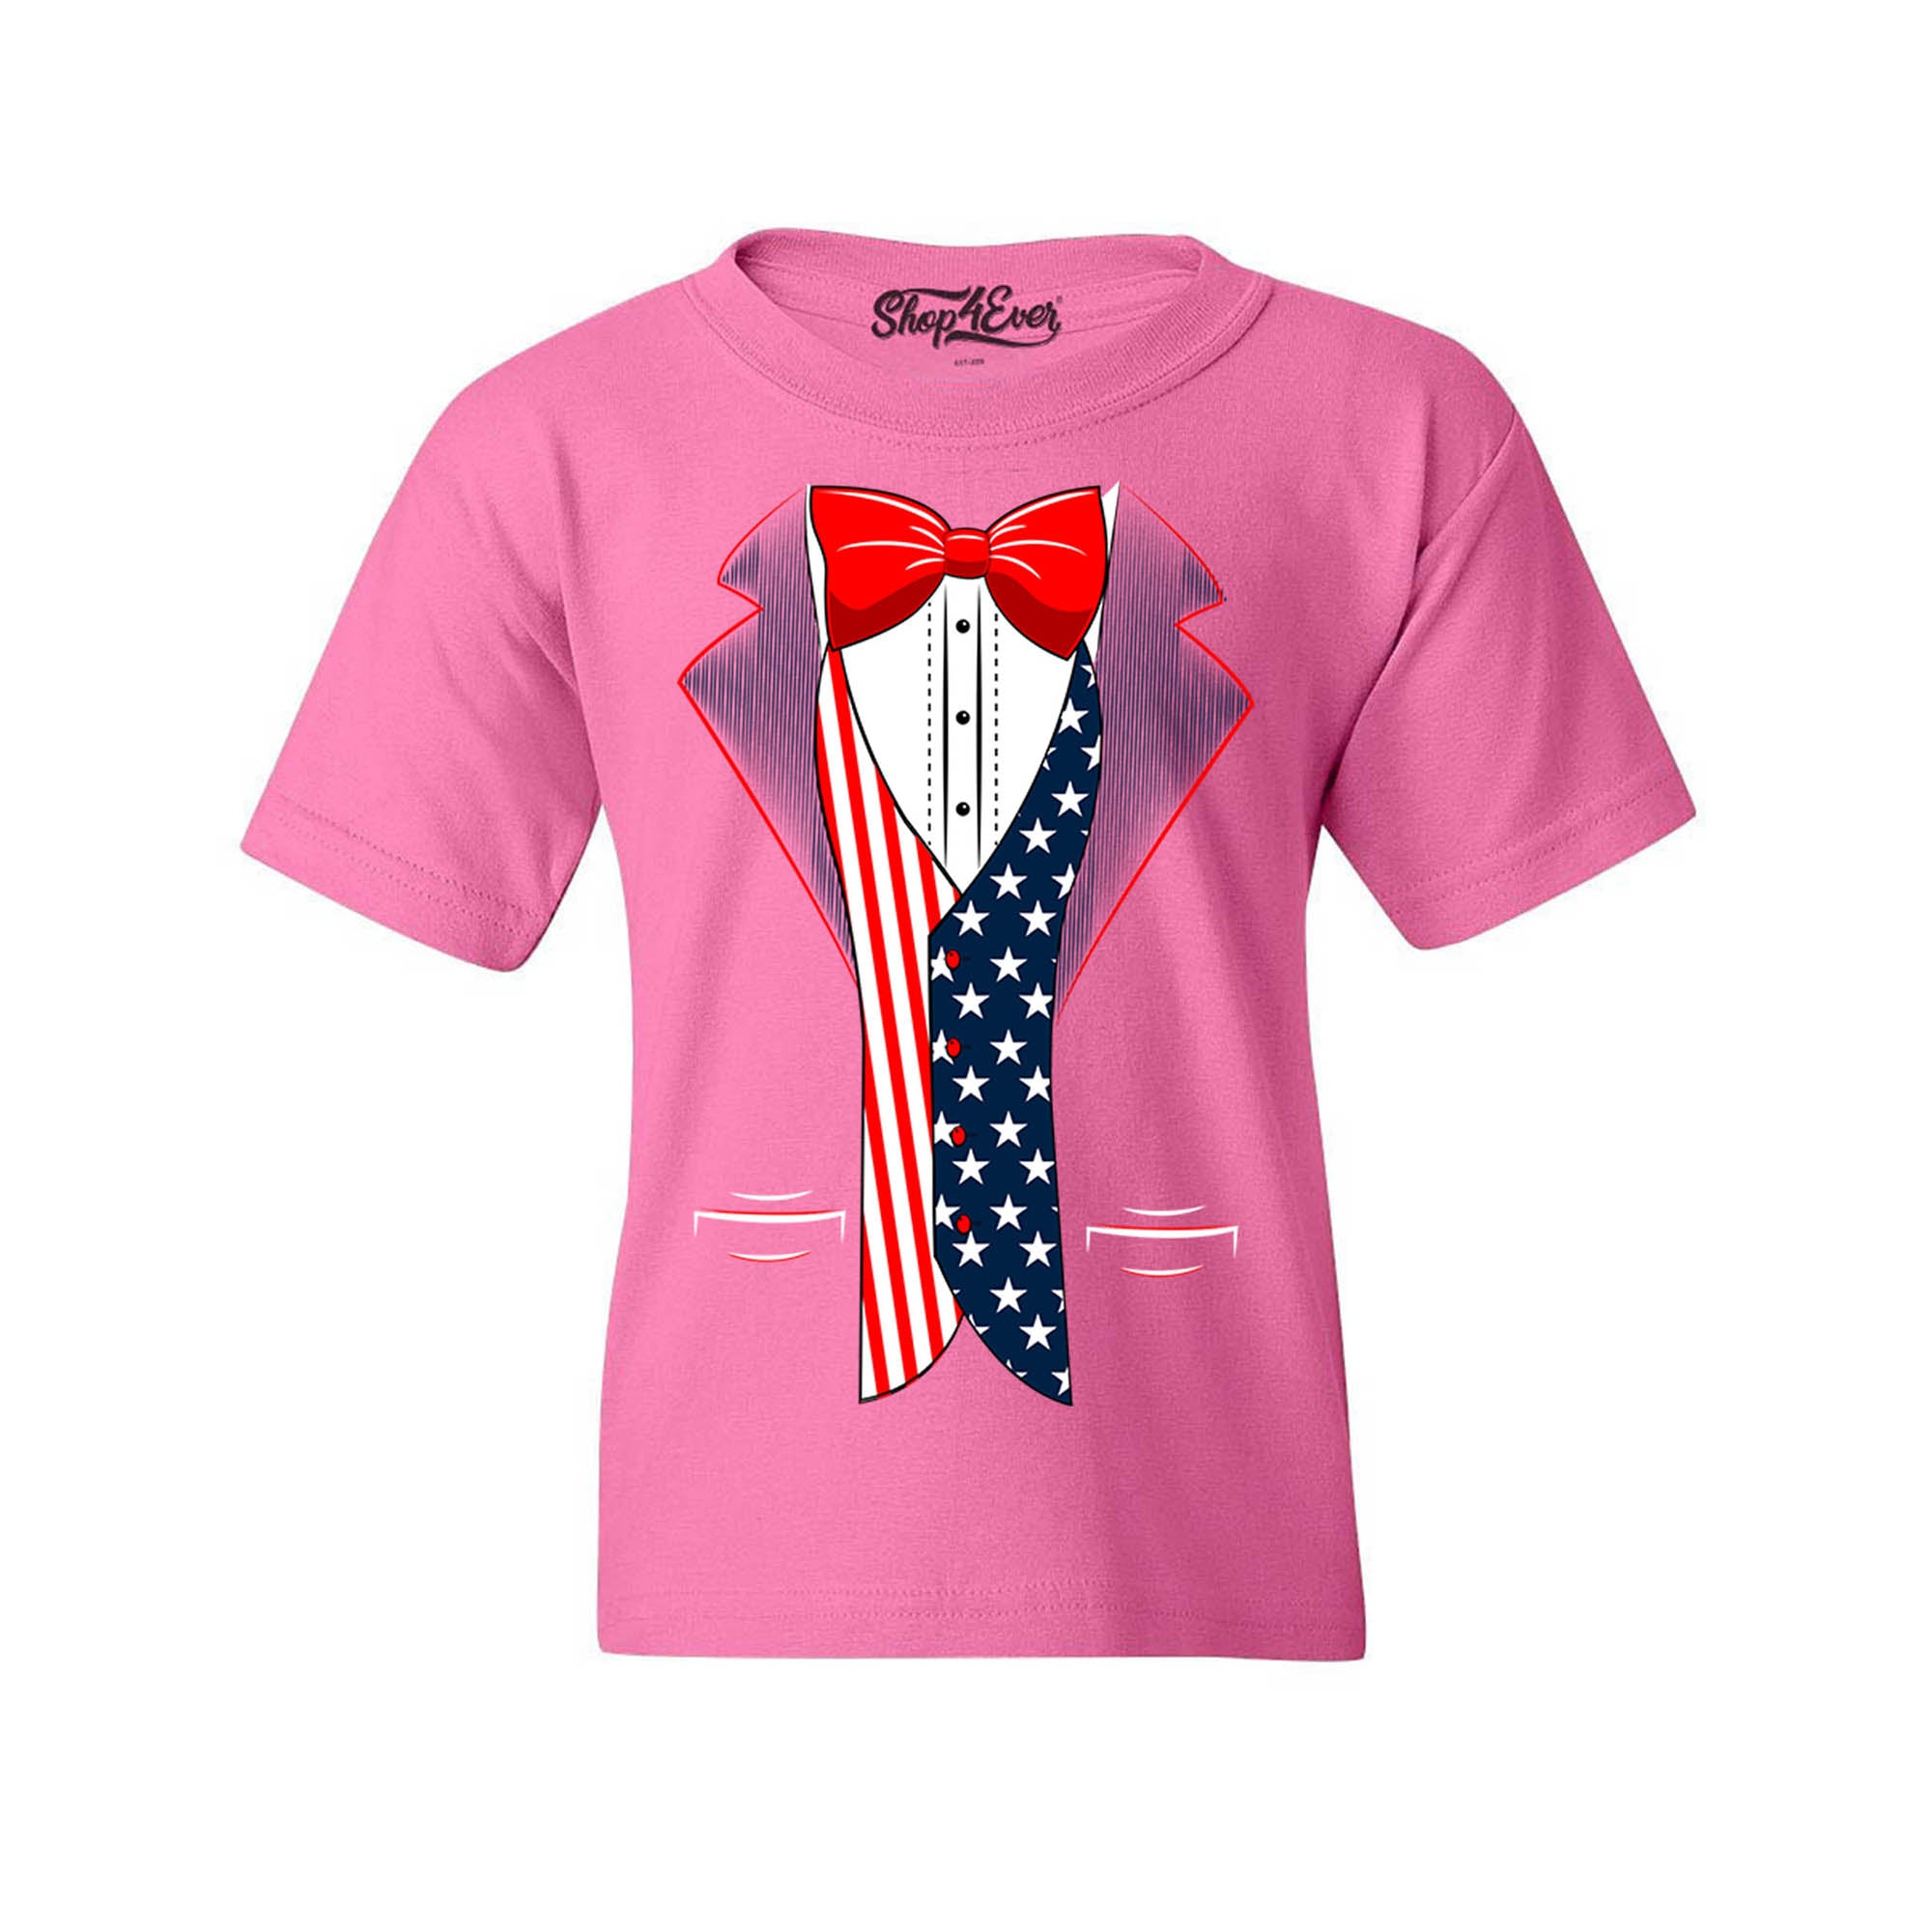 4th of July USA Tuxedo American Flag Youth's T-Shirt Youth